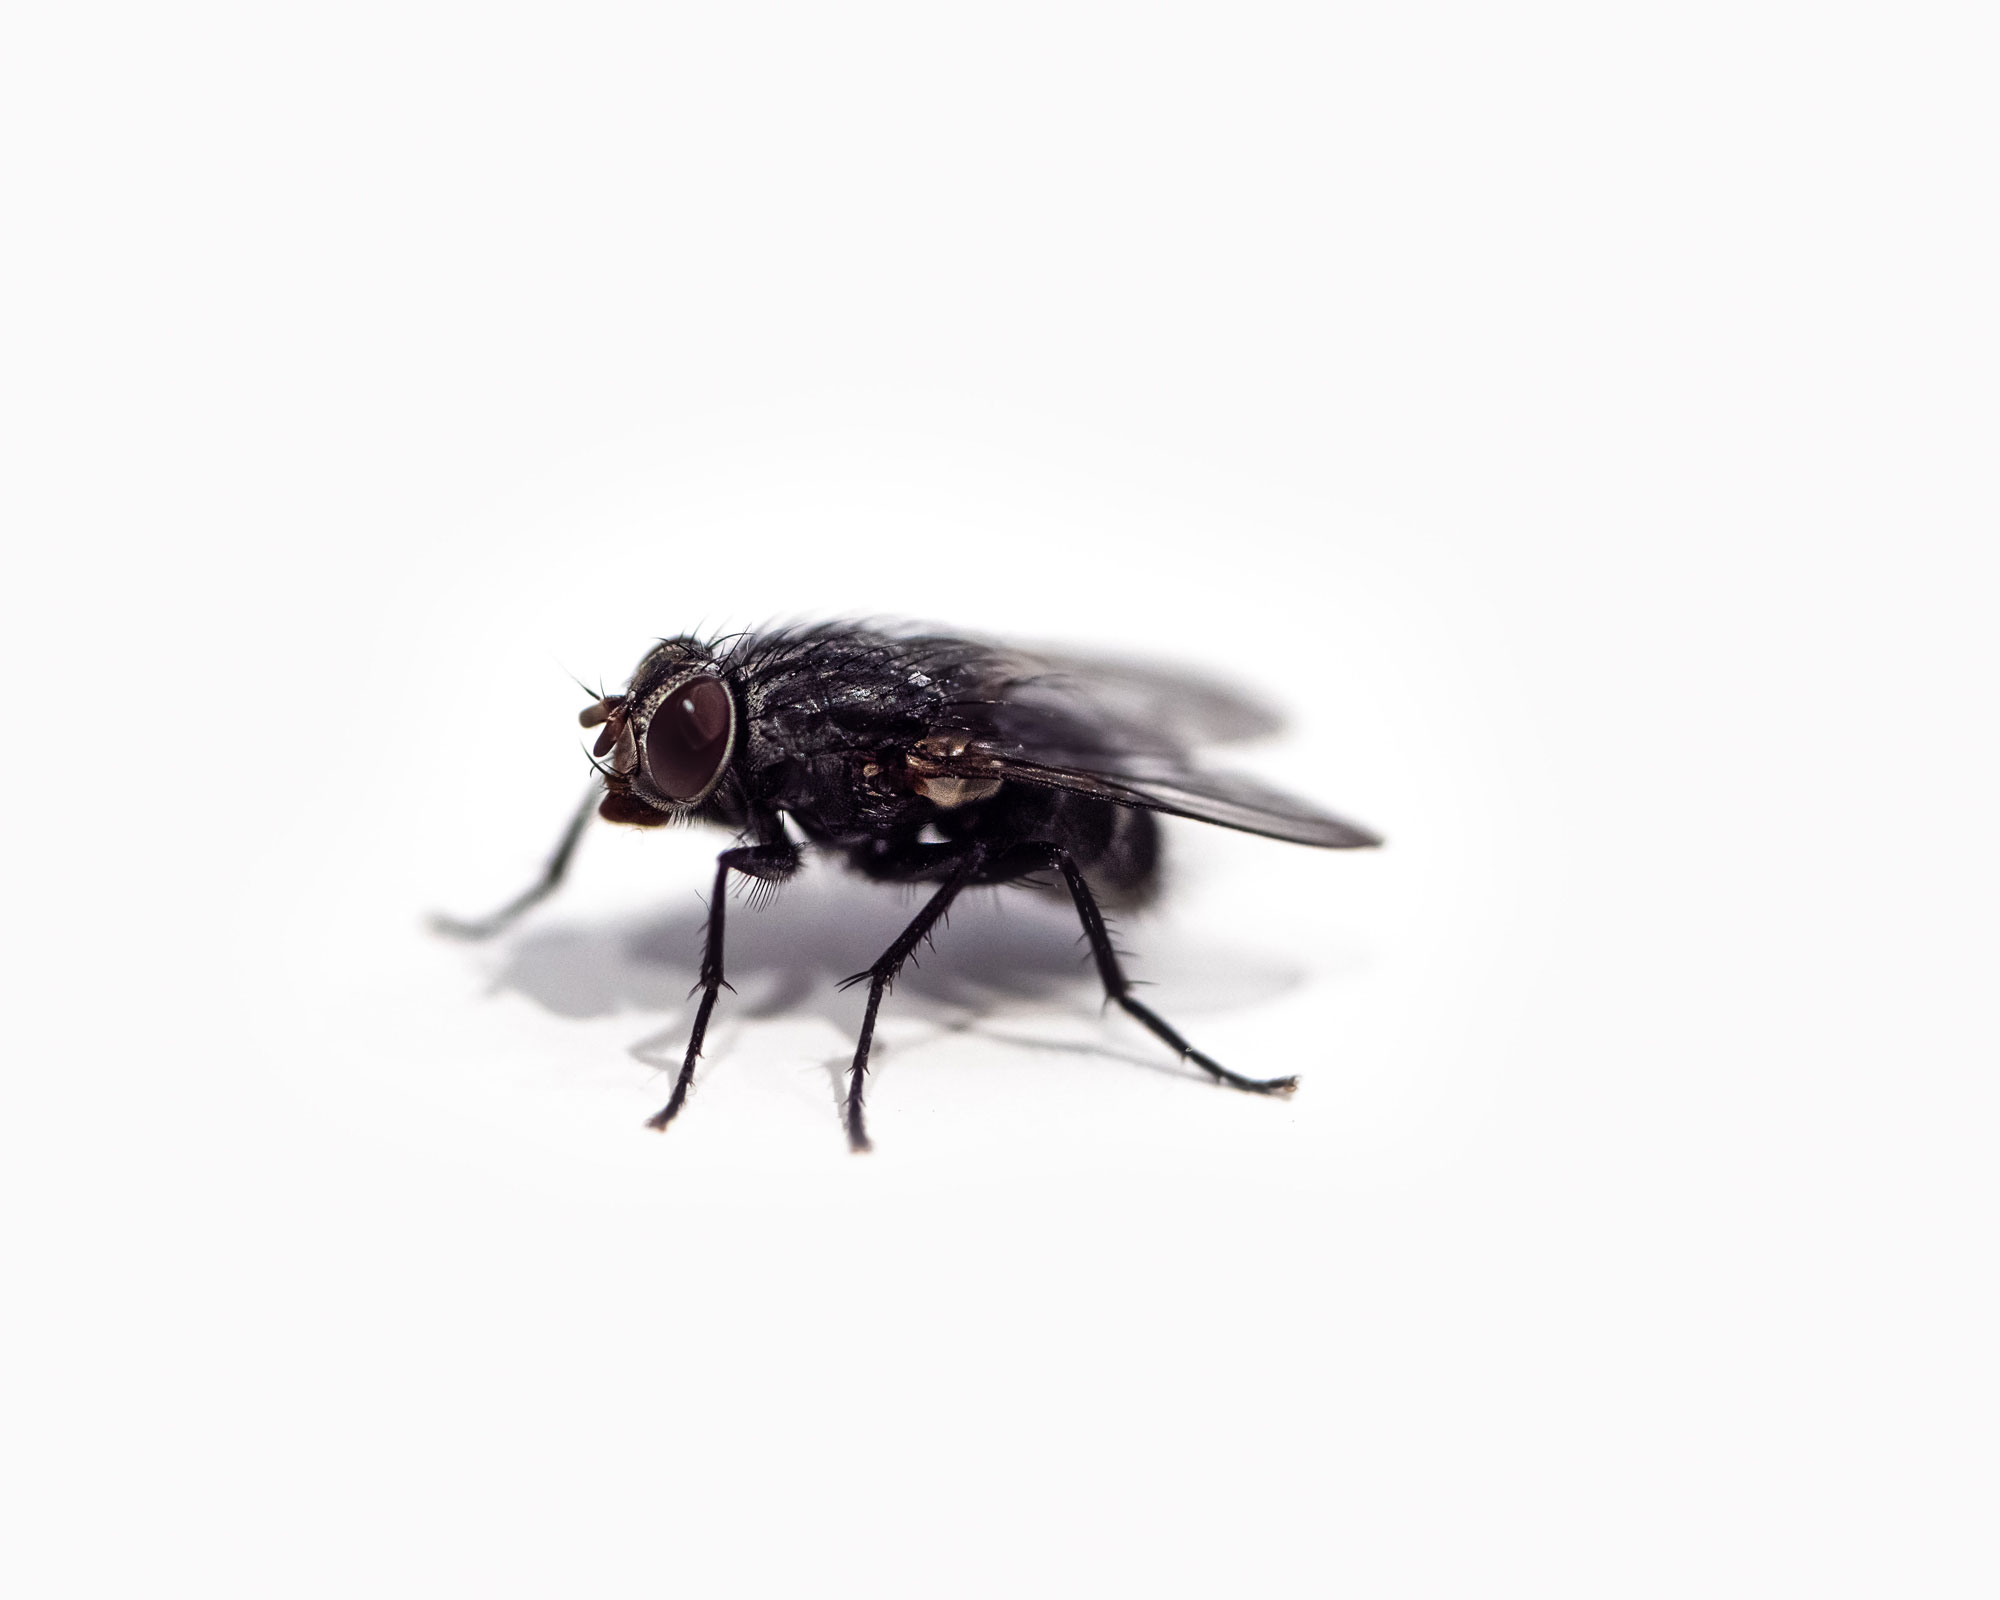 a fly sitting on a white background - how to get rid of spiders - unsplash